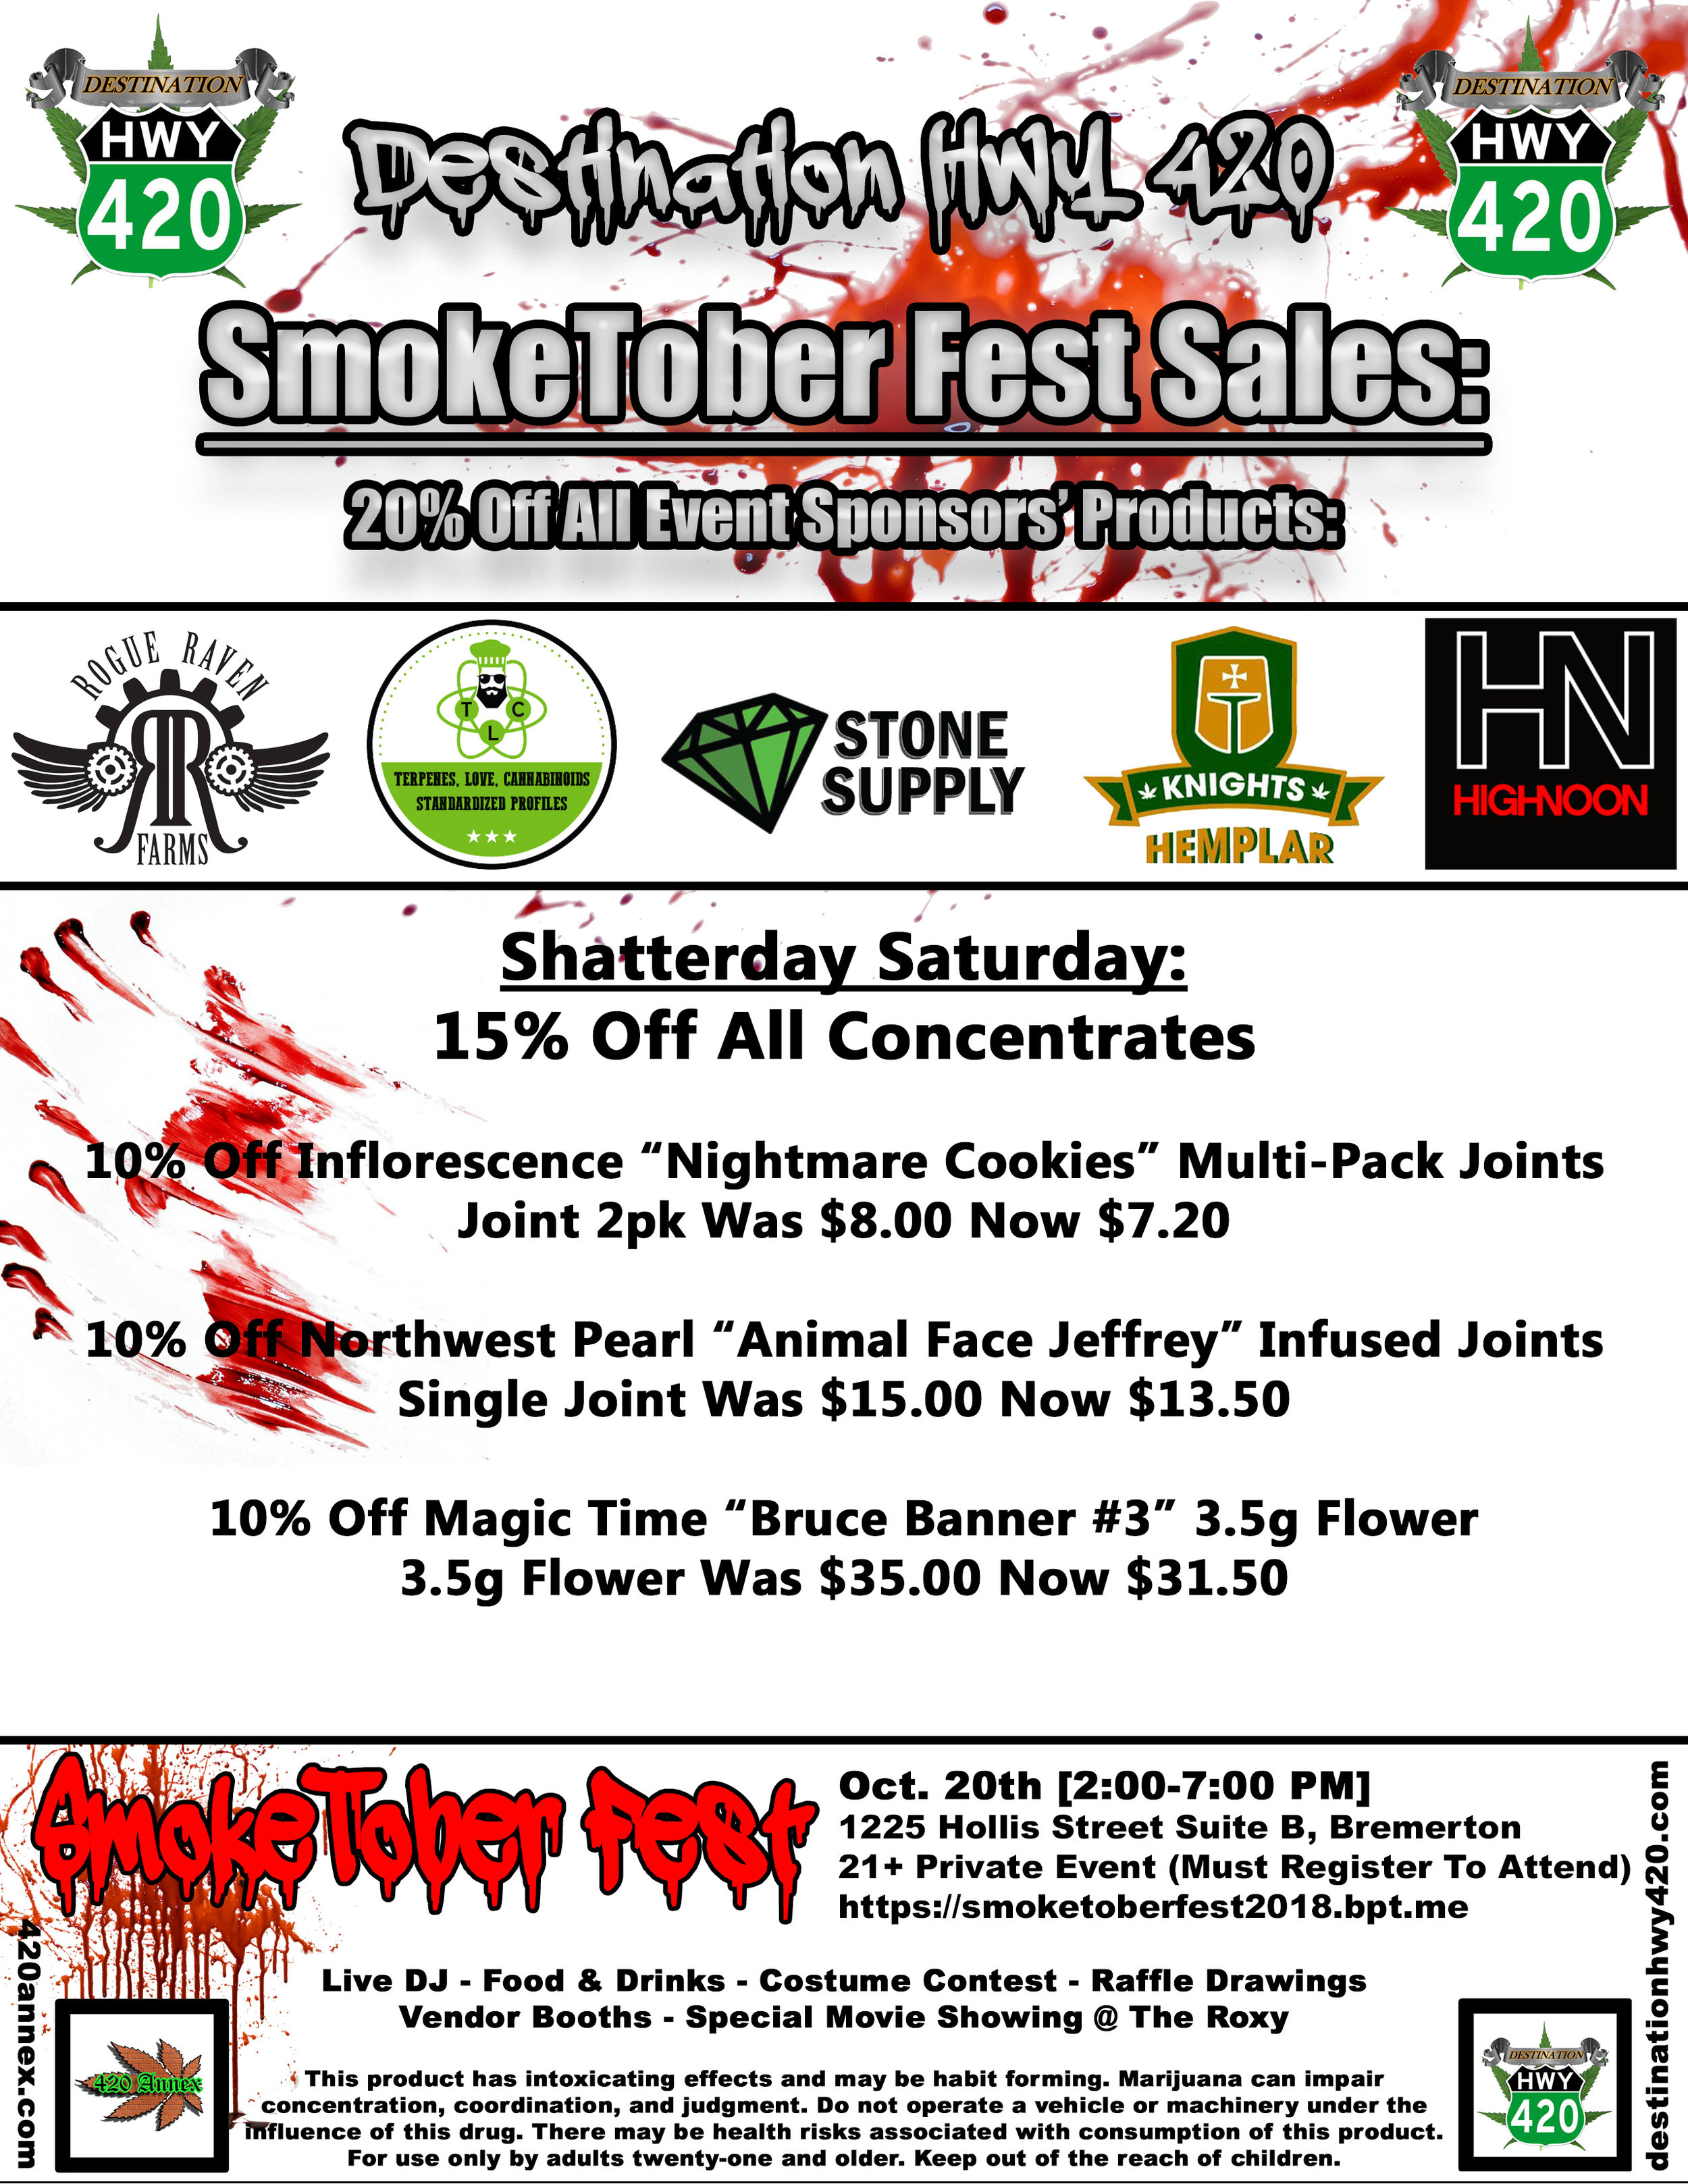 Here are the sales for SmokeTober Fest at Destination HWY 420 in East Bremerton. Make sure to check out our sales on all of the products from our marijuana producers and processors sponsoring the event. Join us this Saturday for music, food, drinks, costume contests, raffle drawings, cannabis vendor booths, and a special movie showing at the Historic Roxy in downtown Bremerton. We look forward to seeing you all tomorrow at Kitsap County’s first ever “SmokeTober Fest”!